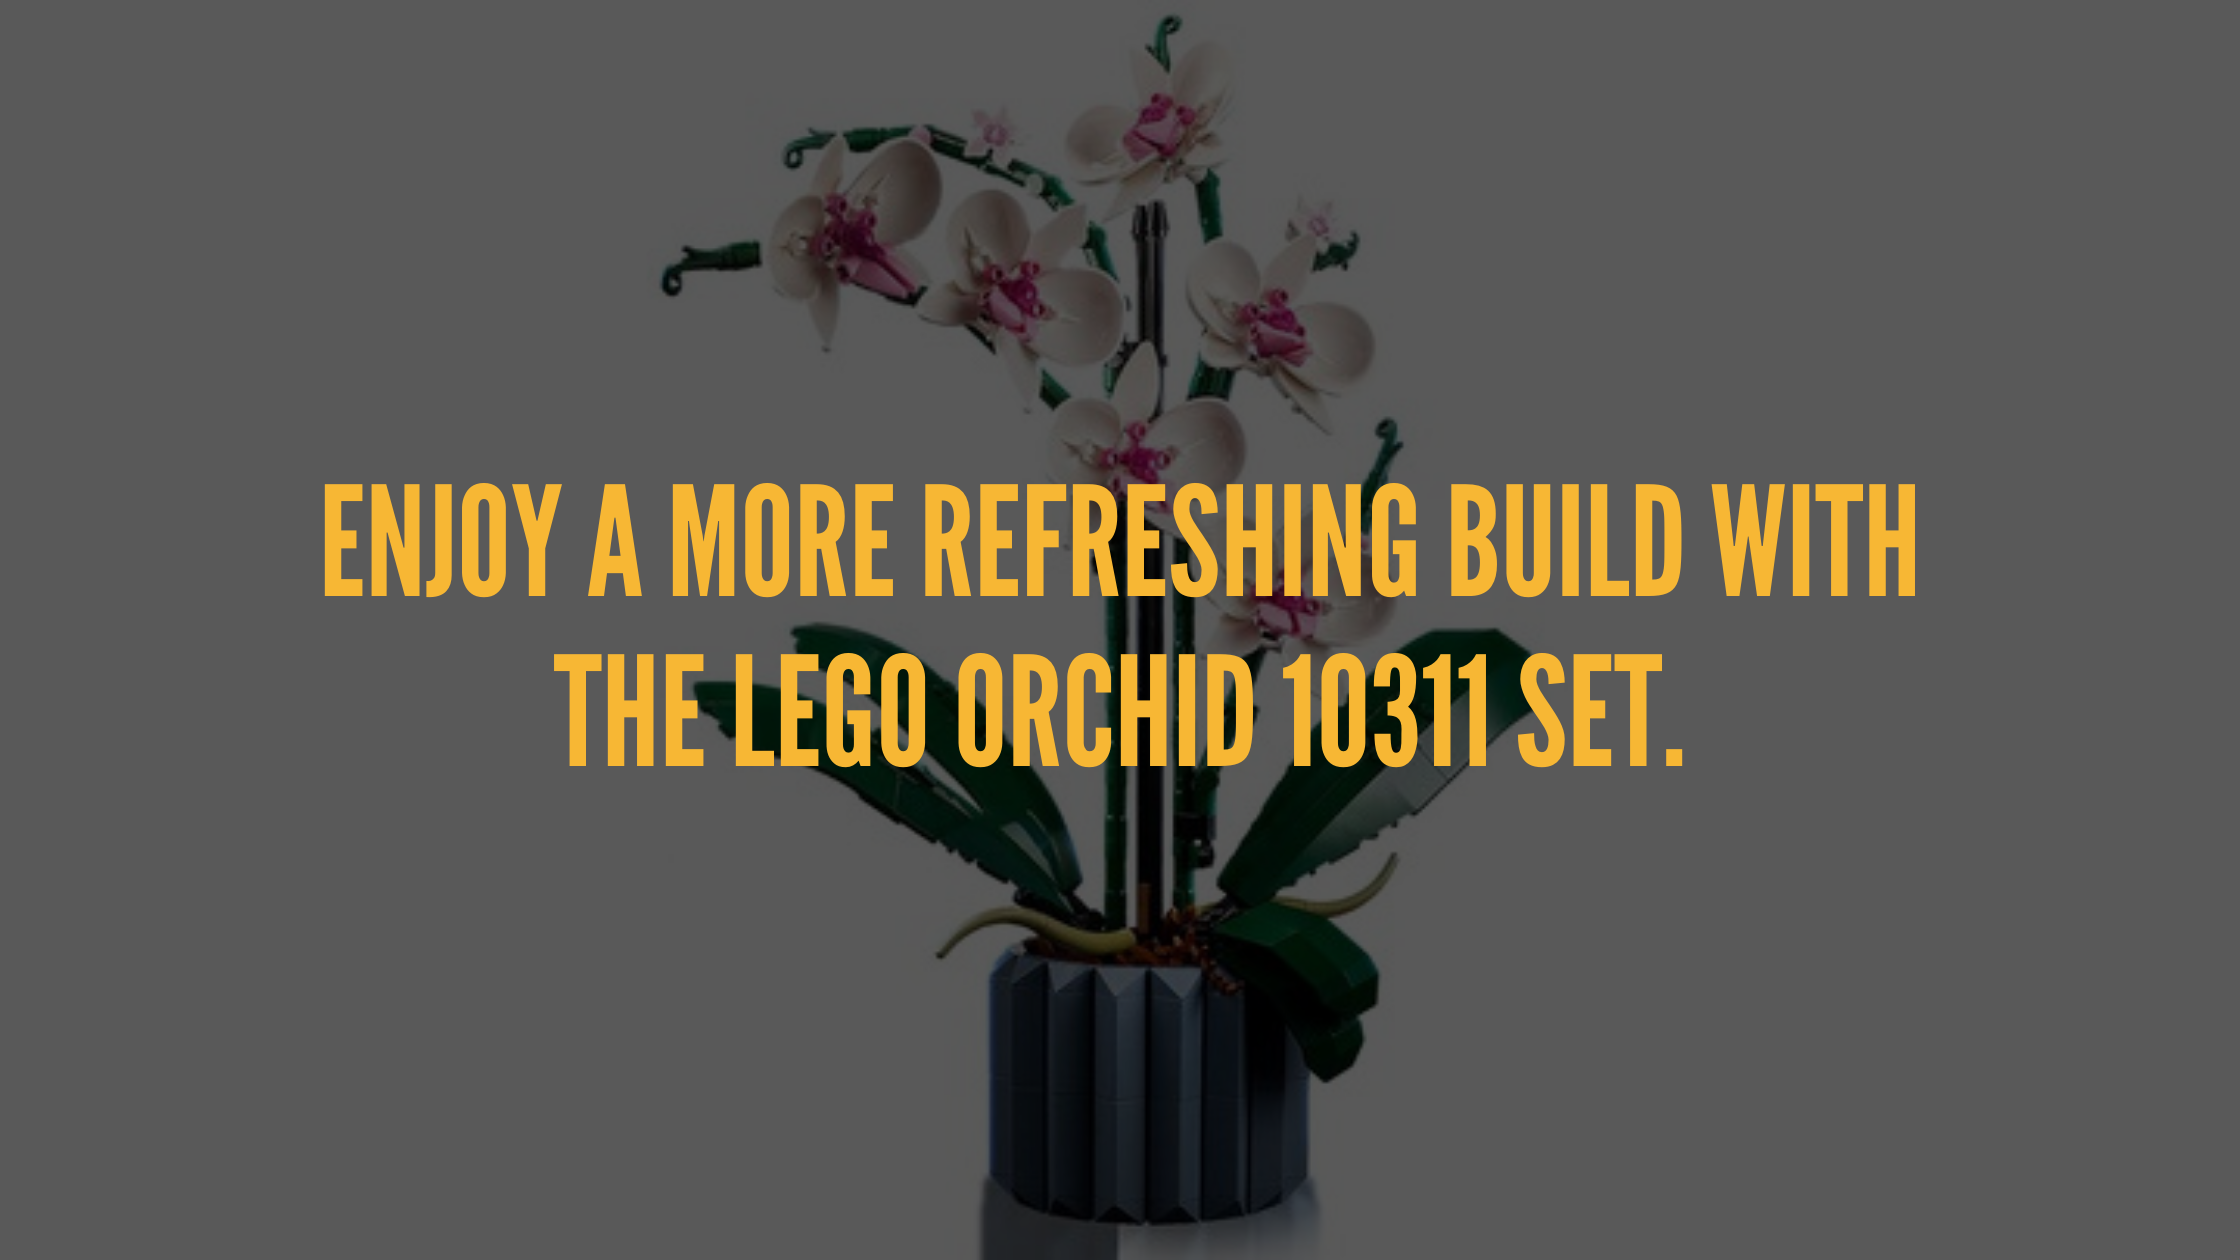 As requested, build pics of the Lego orchid : r/orchids